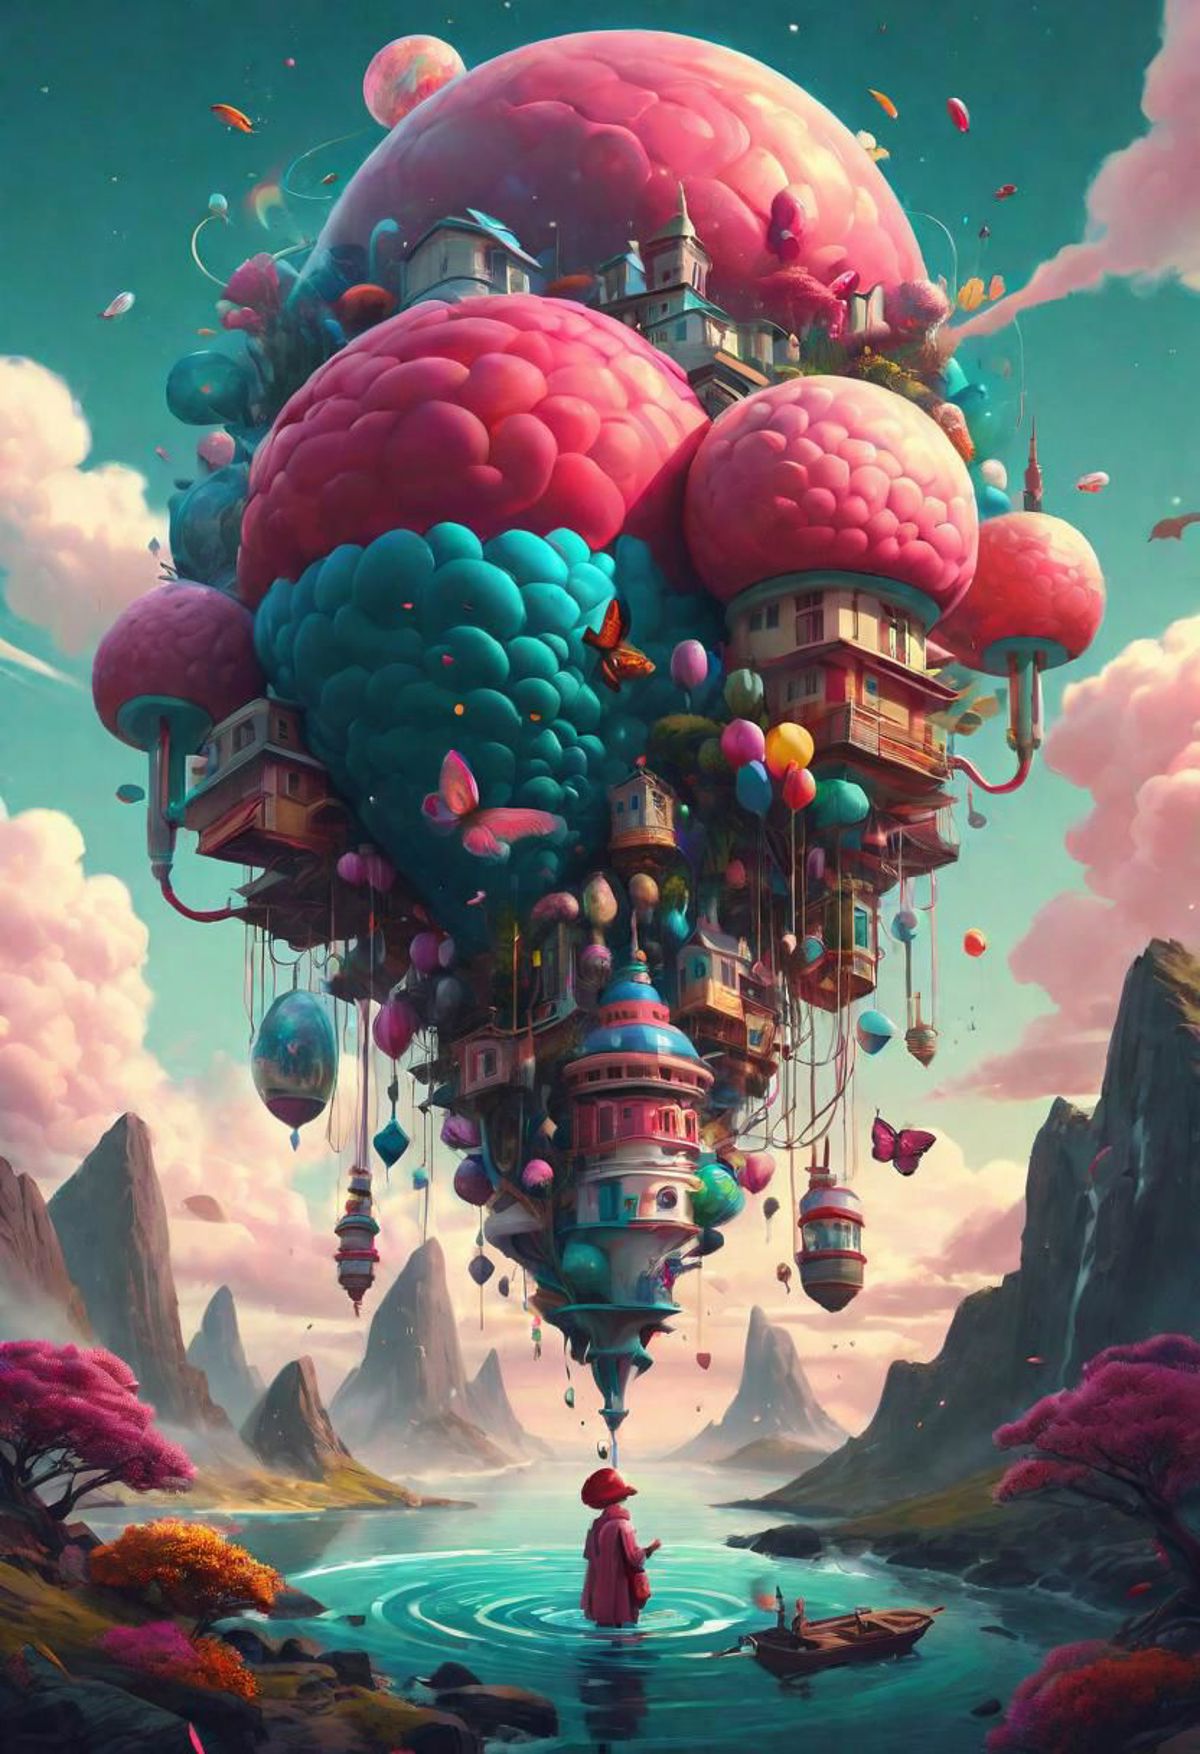 A whimsical painting of a giant castle made of balloons and other objects.